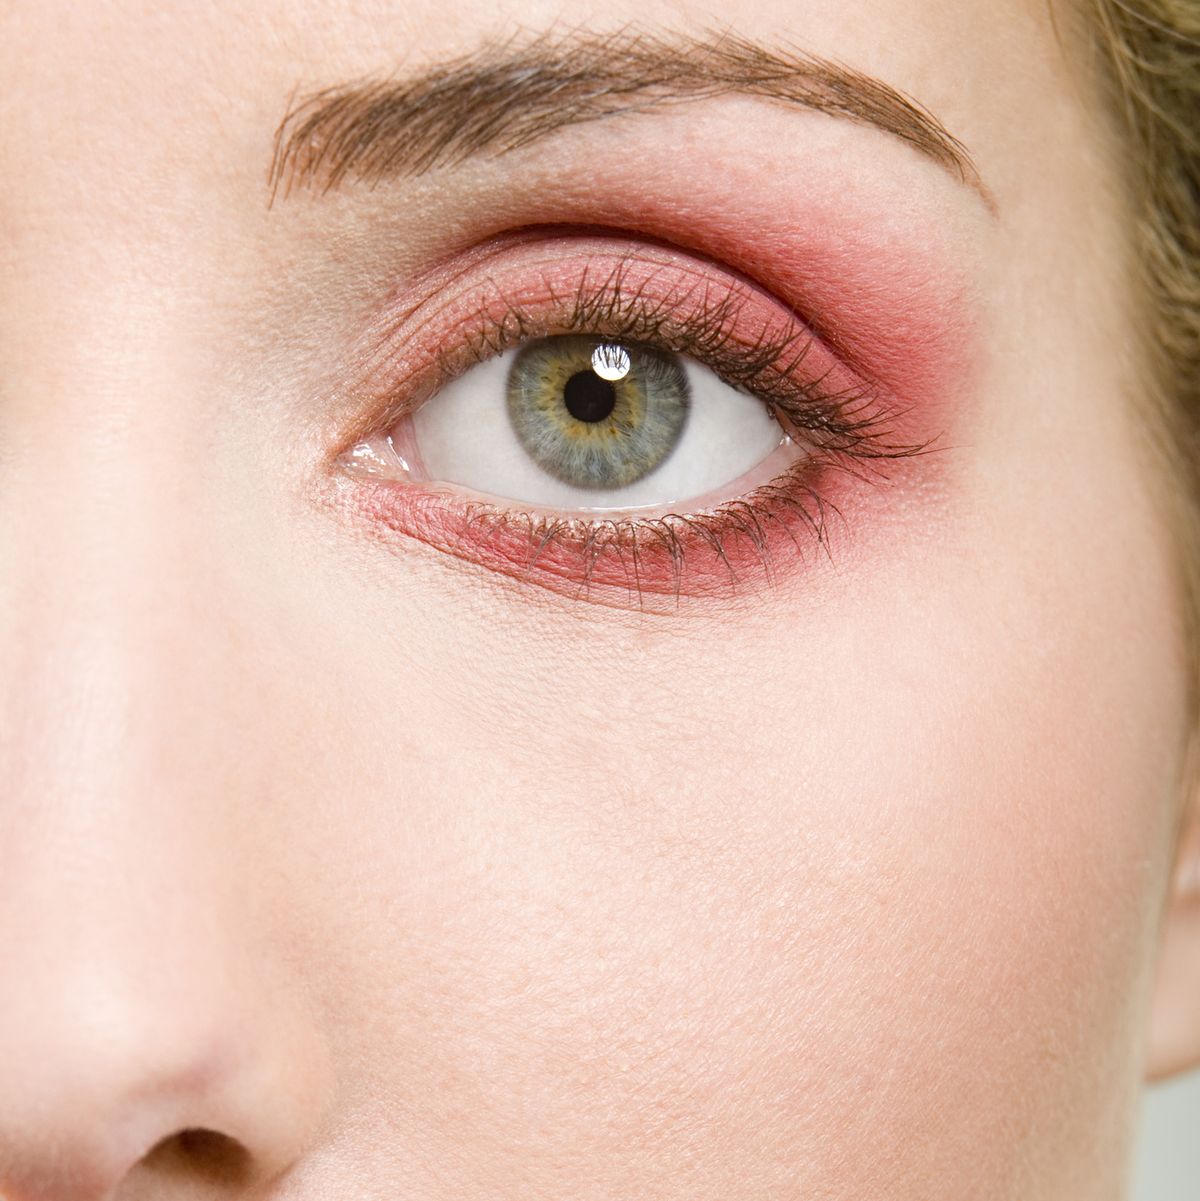 Blepharitis: sore, itchy, red and